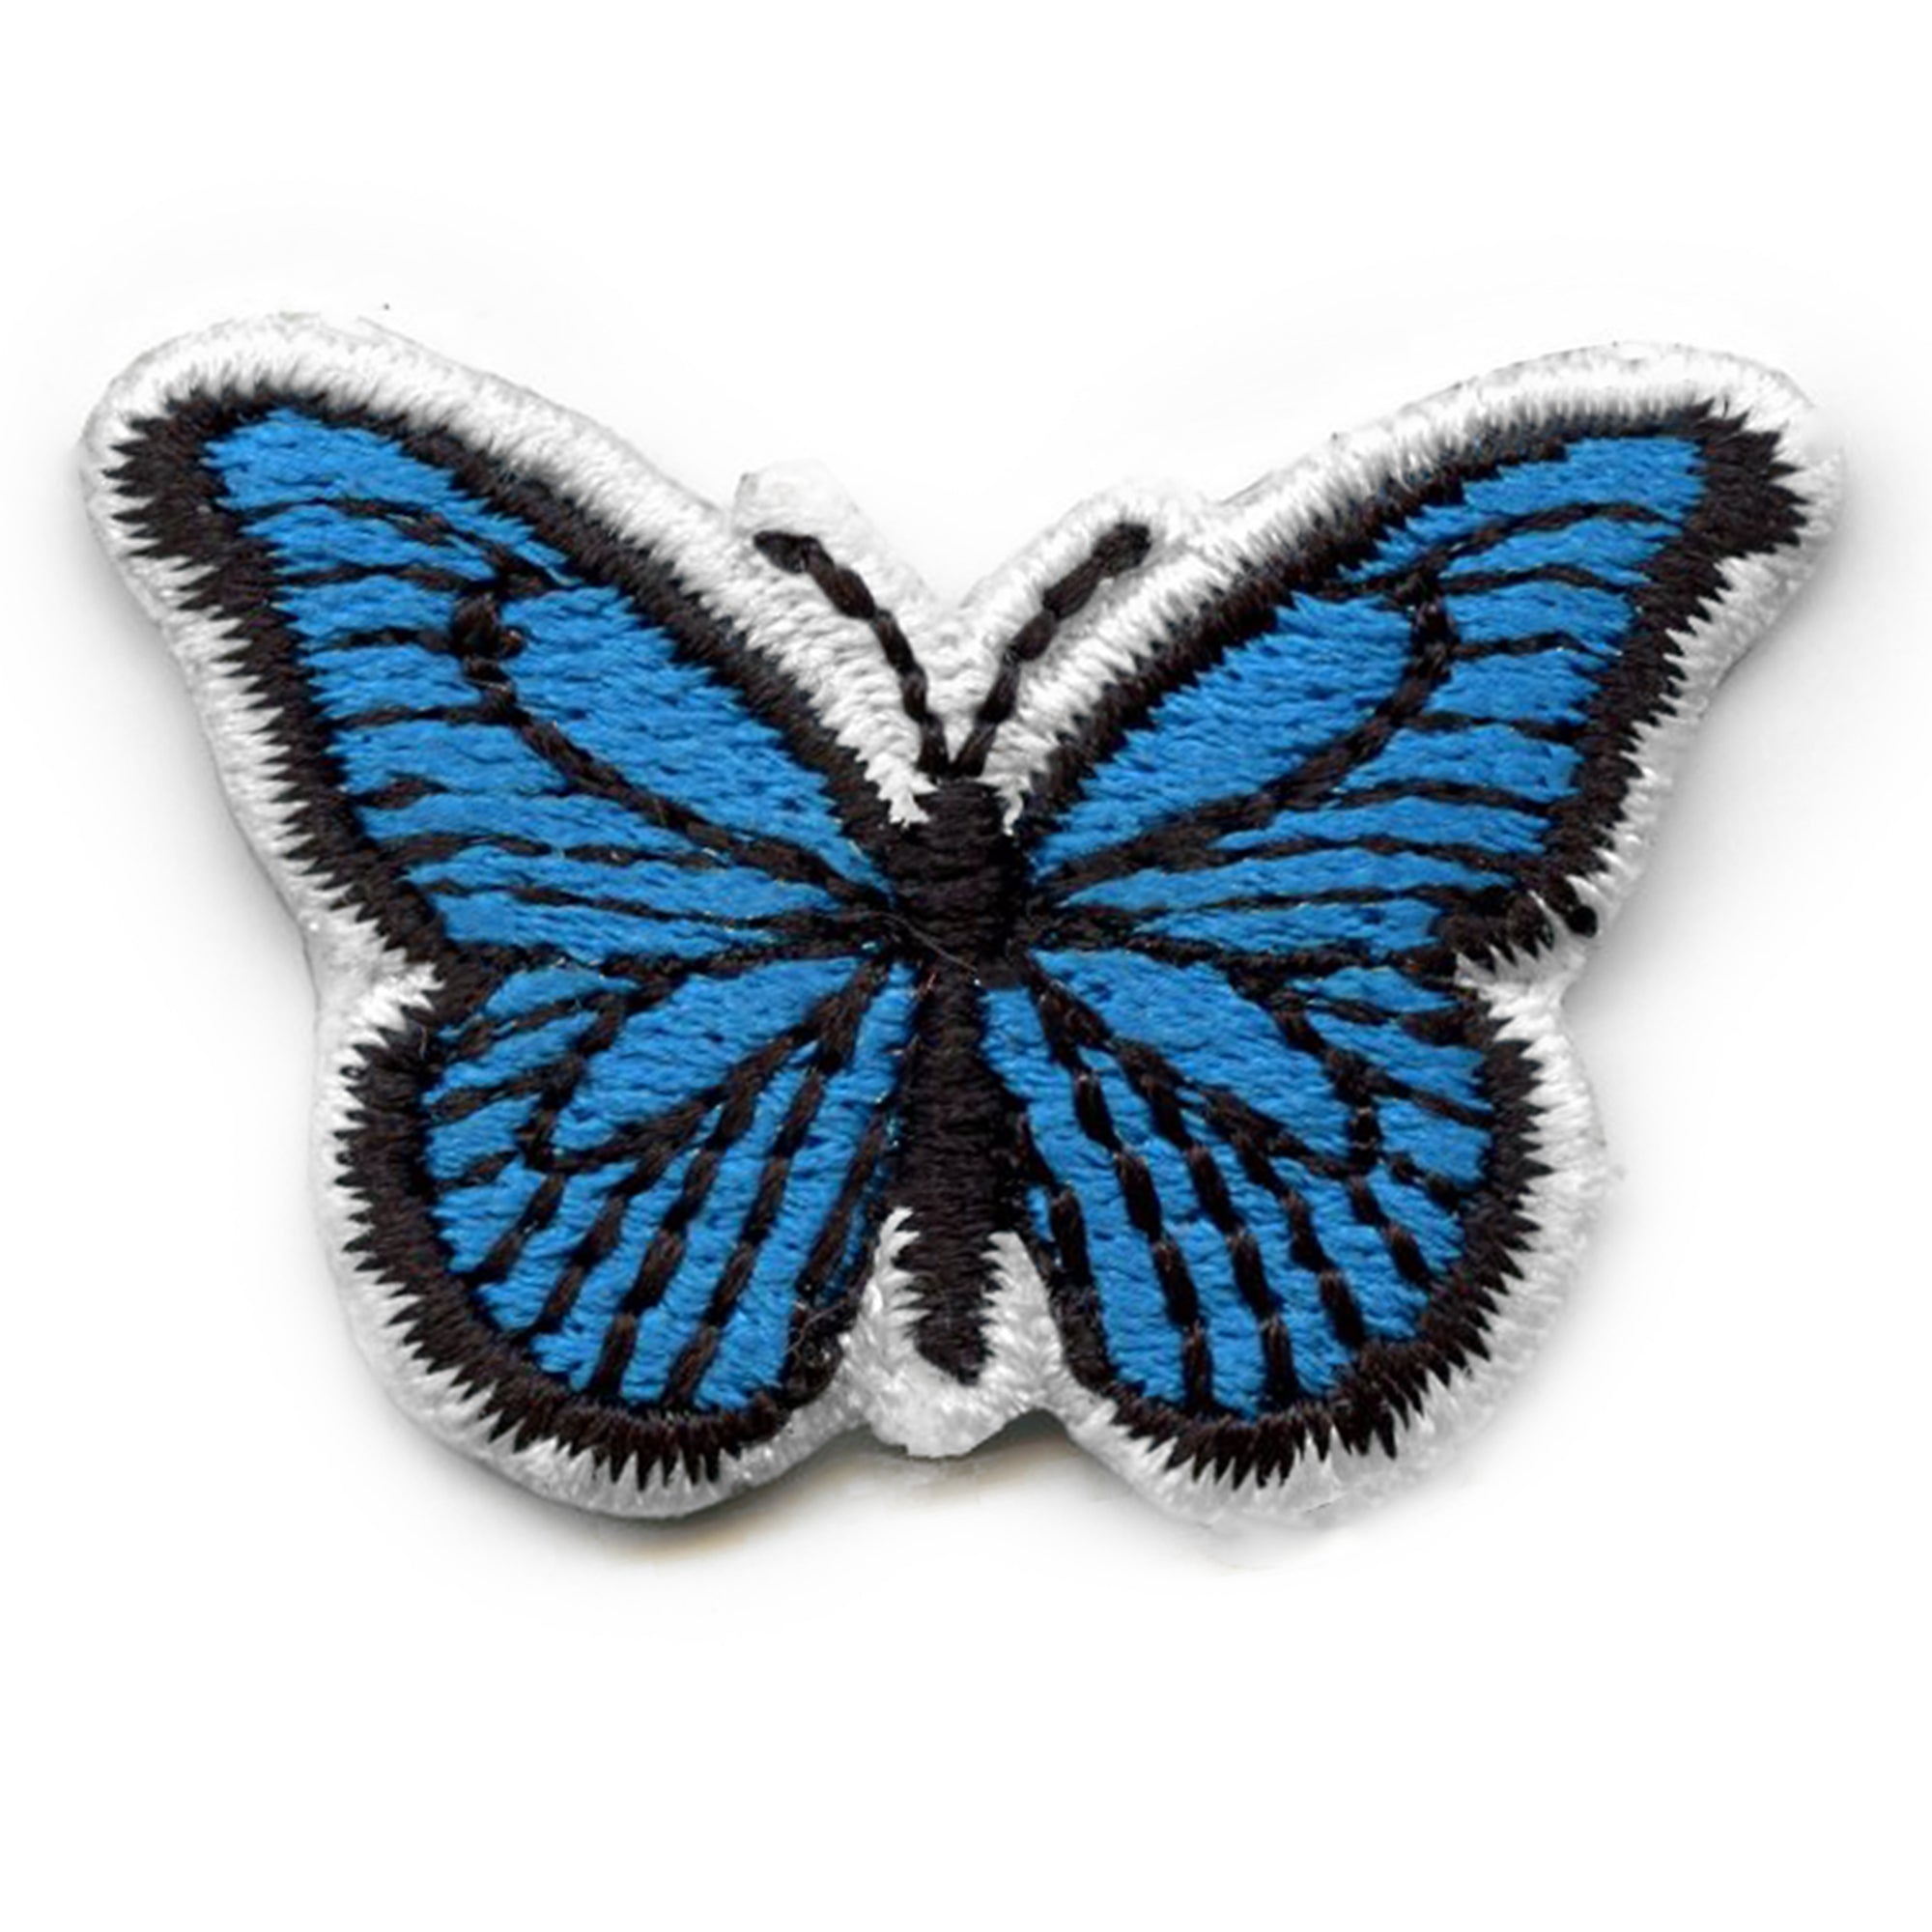 Flying Purple & Blue Butterflies Up Patch, Butterfly Patches